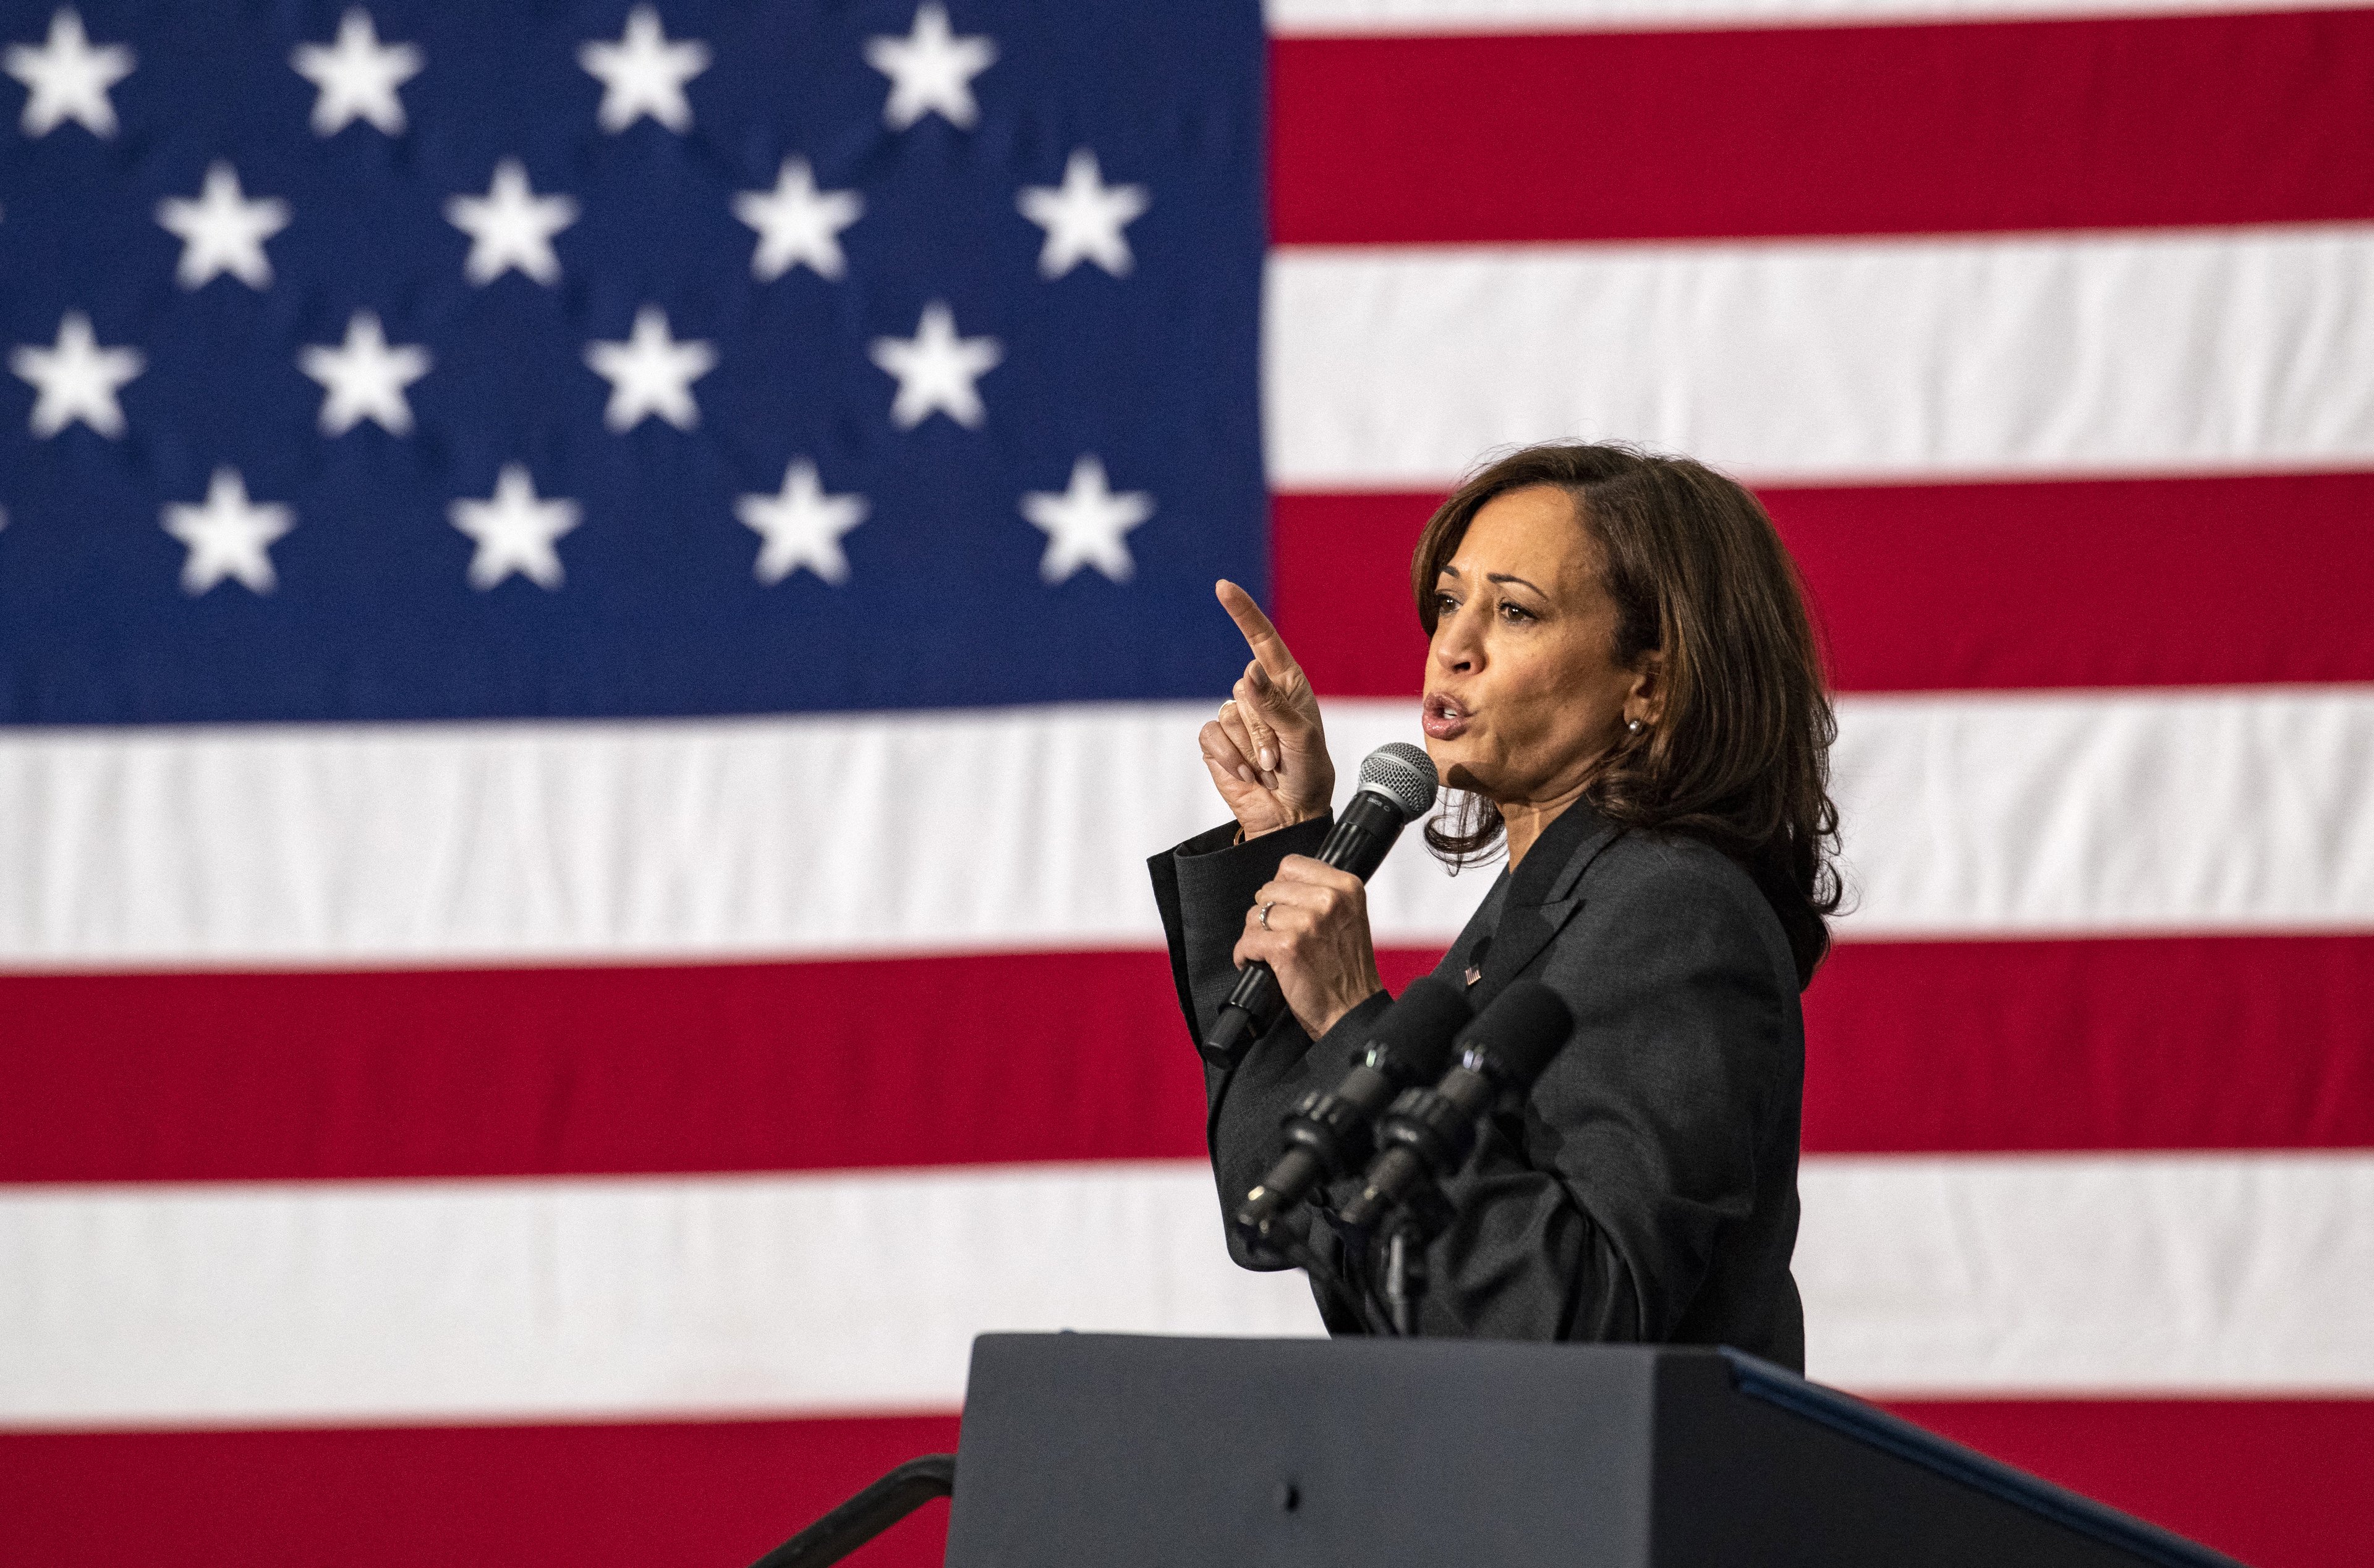 (FILES) US Vice President Kamala Harris speaks during a "Get Out the Vote" rally at the Reggie Lewis Track and Athletic Center at Roxbury Community College in Boston, Massachusetts, on November 2, 2022. Joe Biden on July 21, 2024 dropped out of the US presidential election and endorsed Vice President Kamala Harris as the Democratic Party's new nominee, in a stunning move that upends an already extraordinary 2024 race for the White House. Biden, 81, said he was acting in the "best interest of my party and the country" by bowing to weeks of pressure after a disastrous June debate against Donald Trump stoked worries about his age and mental fitness. (Photo by Joseph Prezioso / AFP)